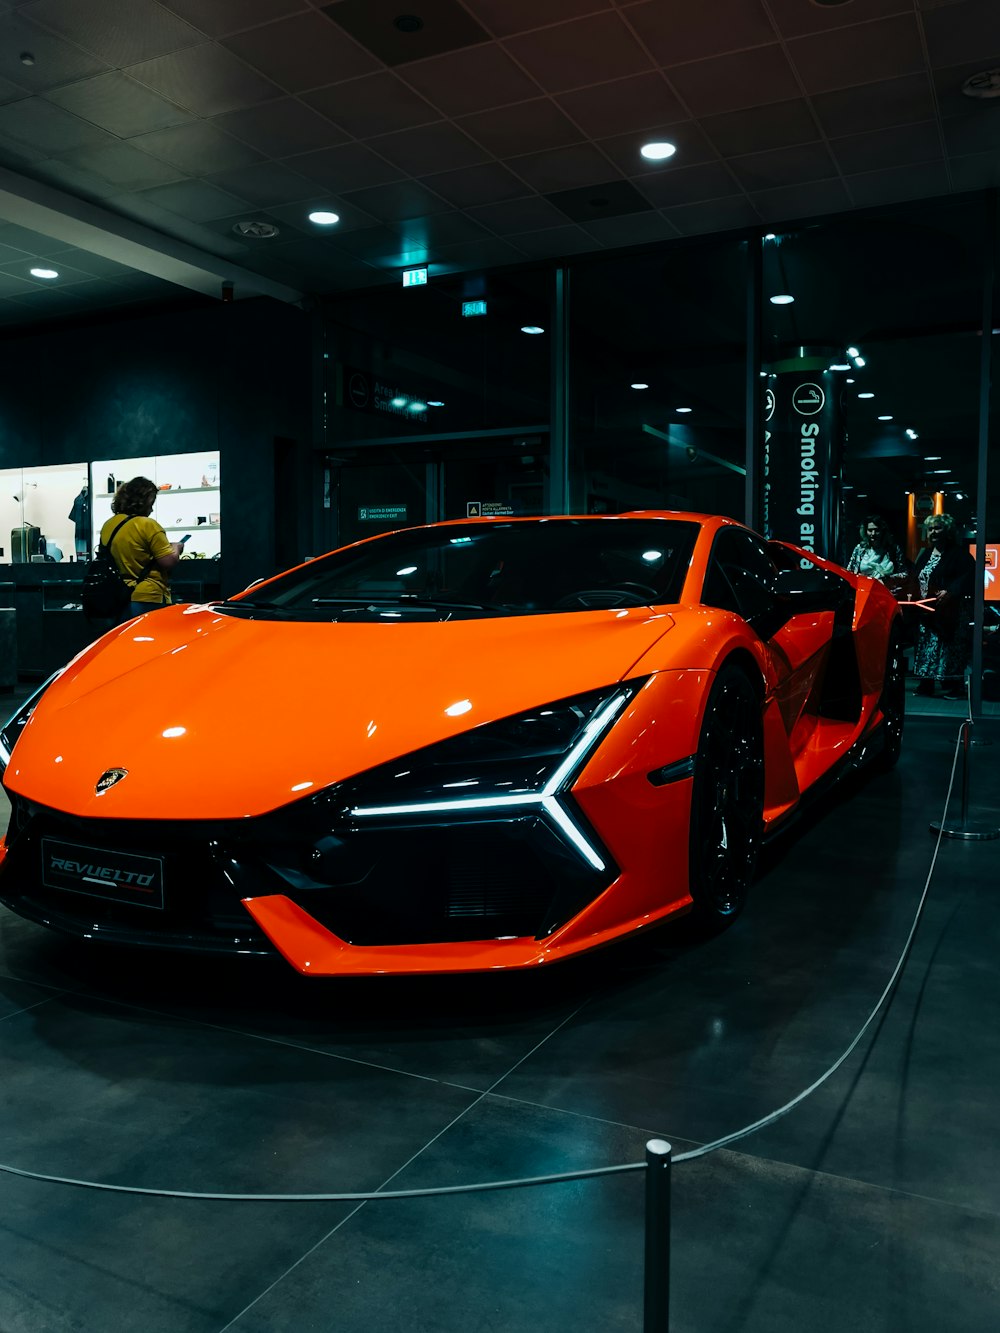 an orange sports car is on display in a showroom